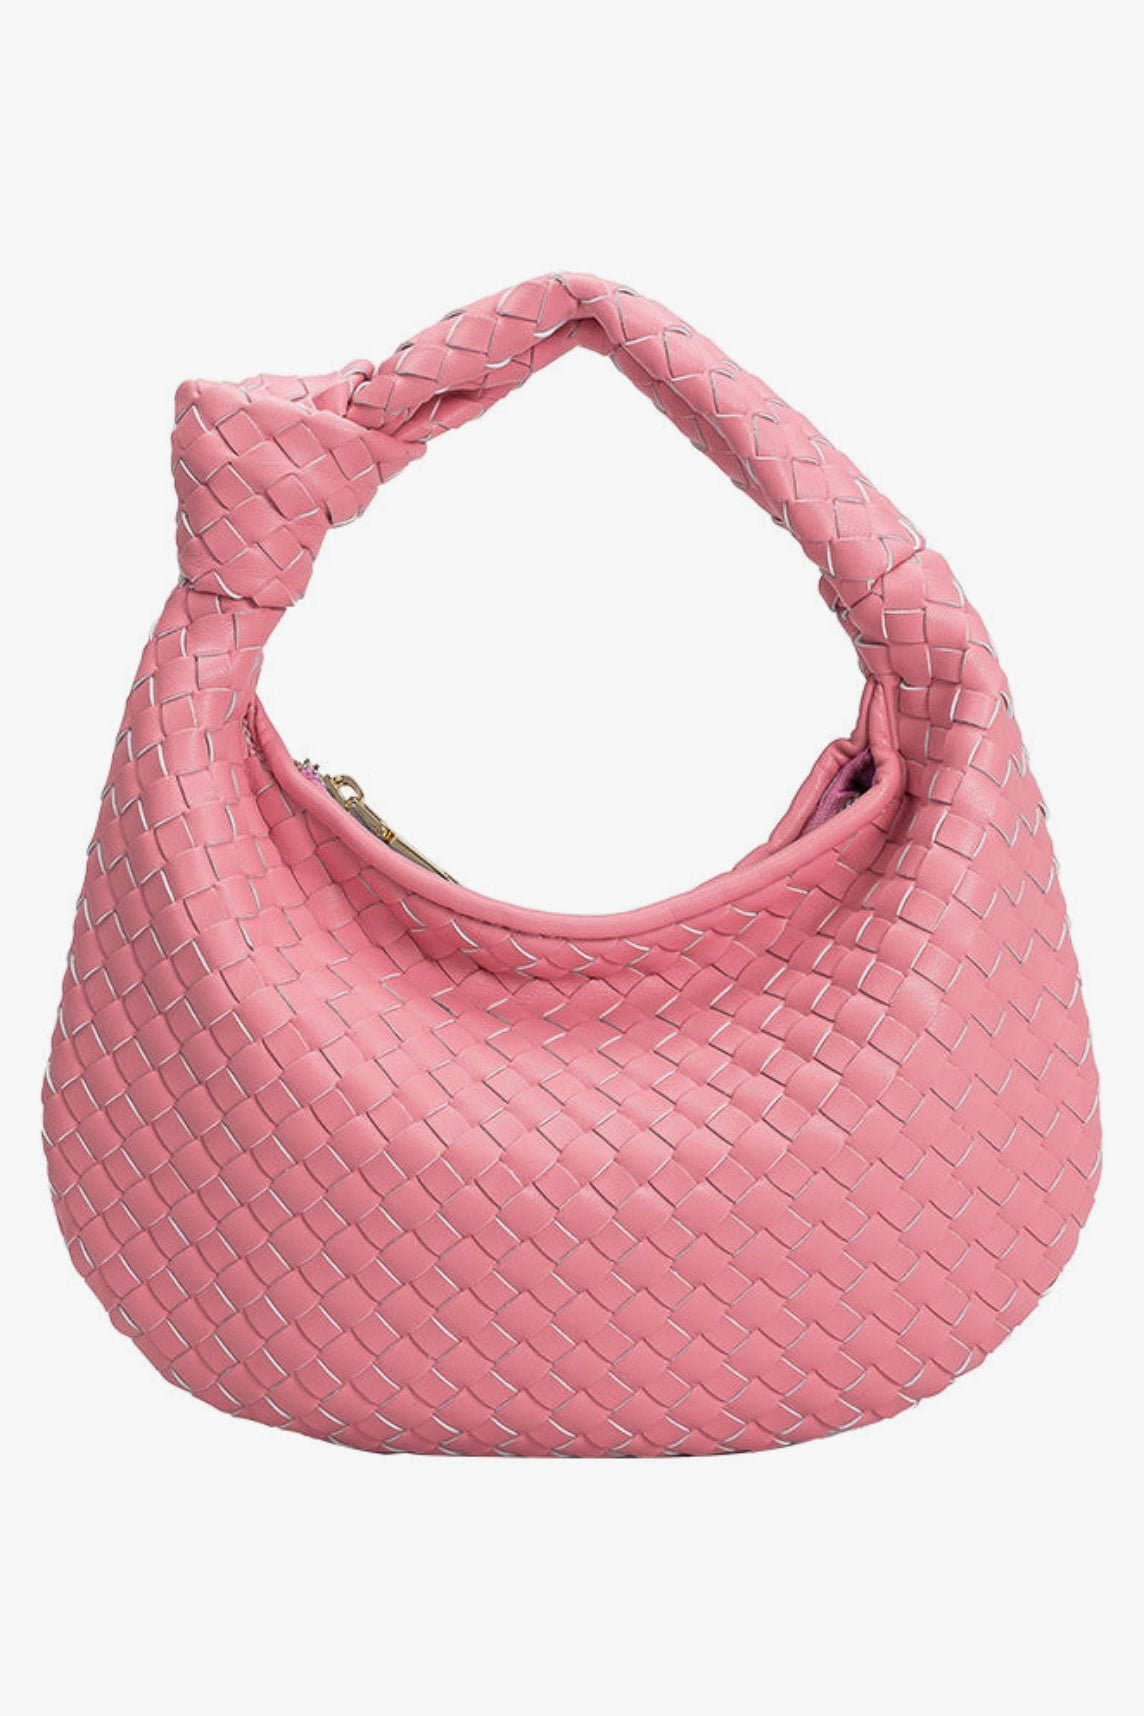 Amazon.com: Pink Leopard Print Womens Chain Shoulder Bag Tote Handbag  Clutch Hobo Purse with Zipper for Travel Casual : Clothing, Shoes & Jewelry